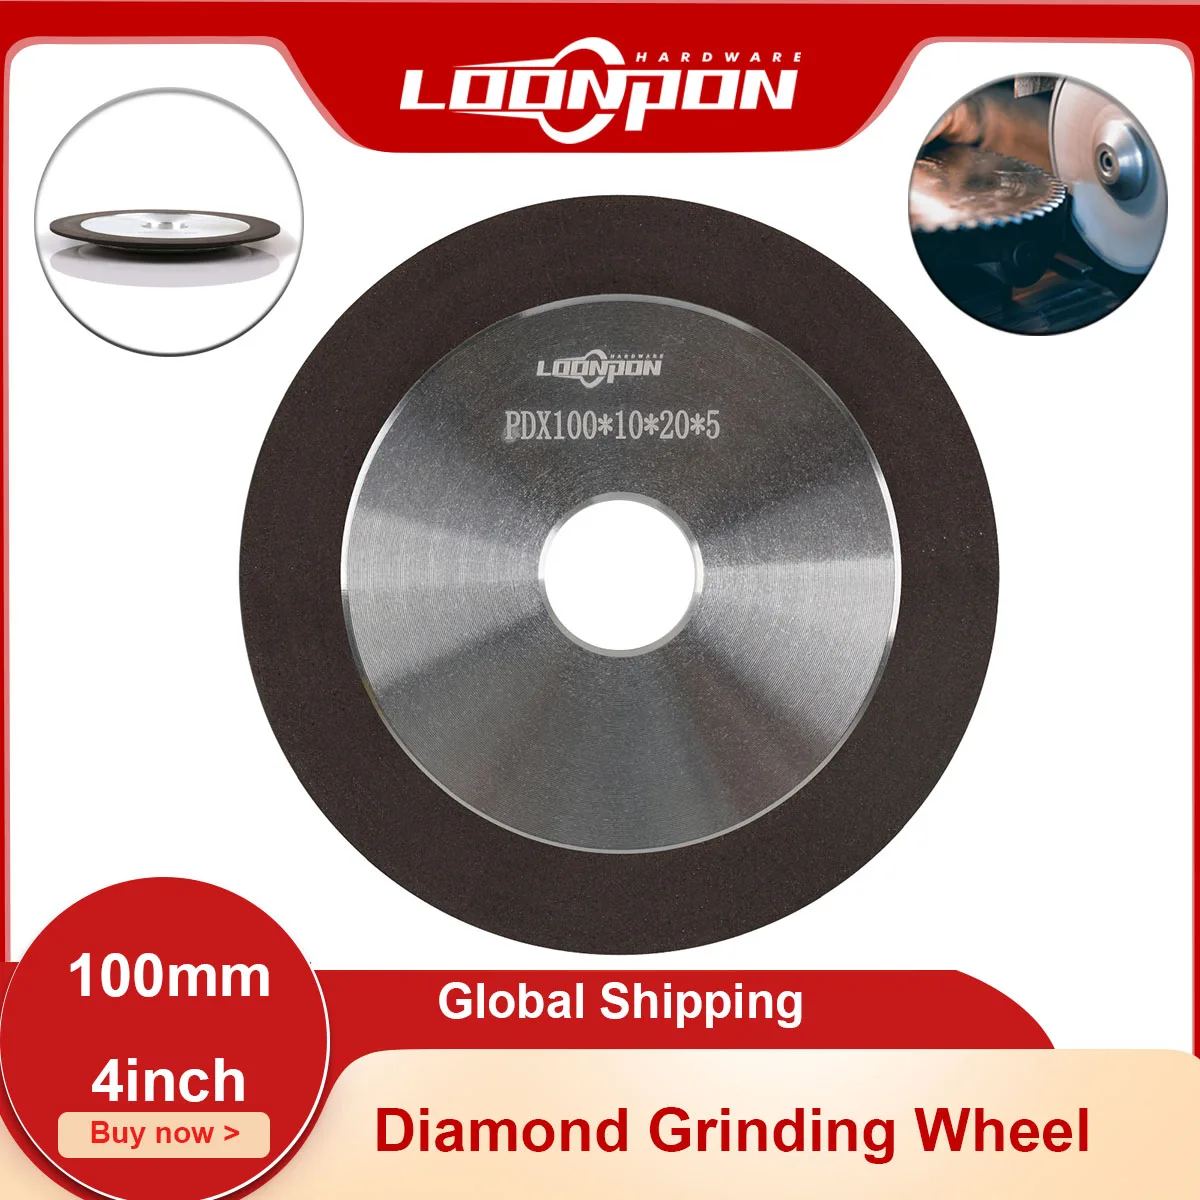 100mm/4inch Diamond Grinding Wheel Grinding Circle Grit 150 for Tungsten Steel Milling Cutter Tool Sharpener Grinder 4 5 6150 400 diamond grinding disc sharpening for tungsten steel milling cutter sharpener 100mm 125mm 150mm